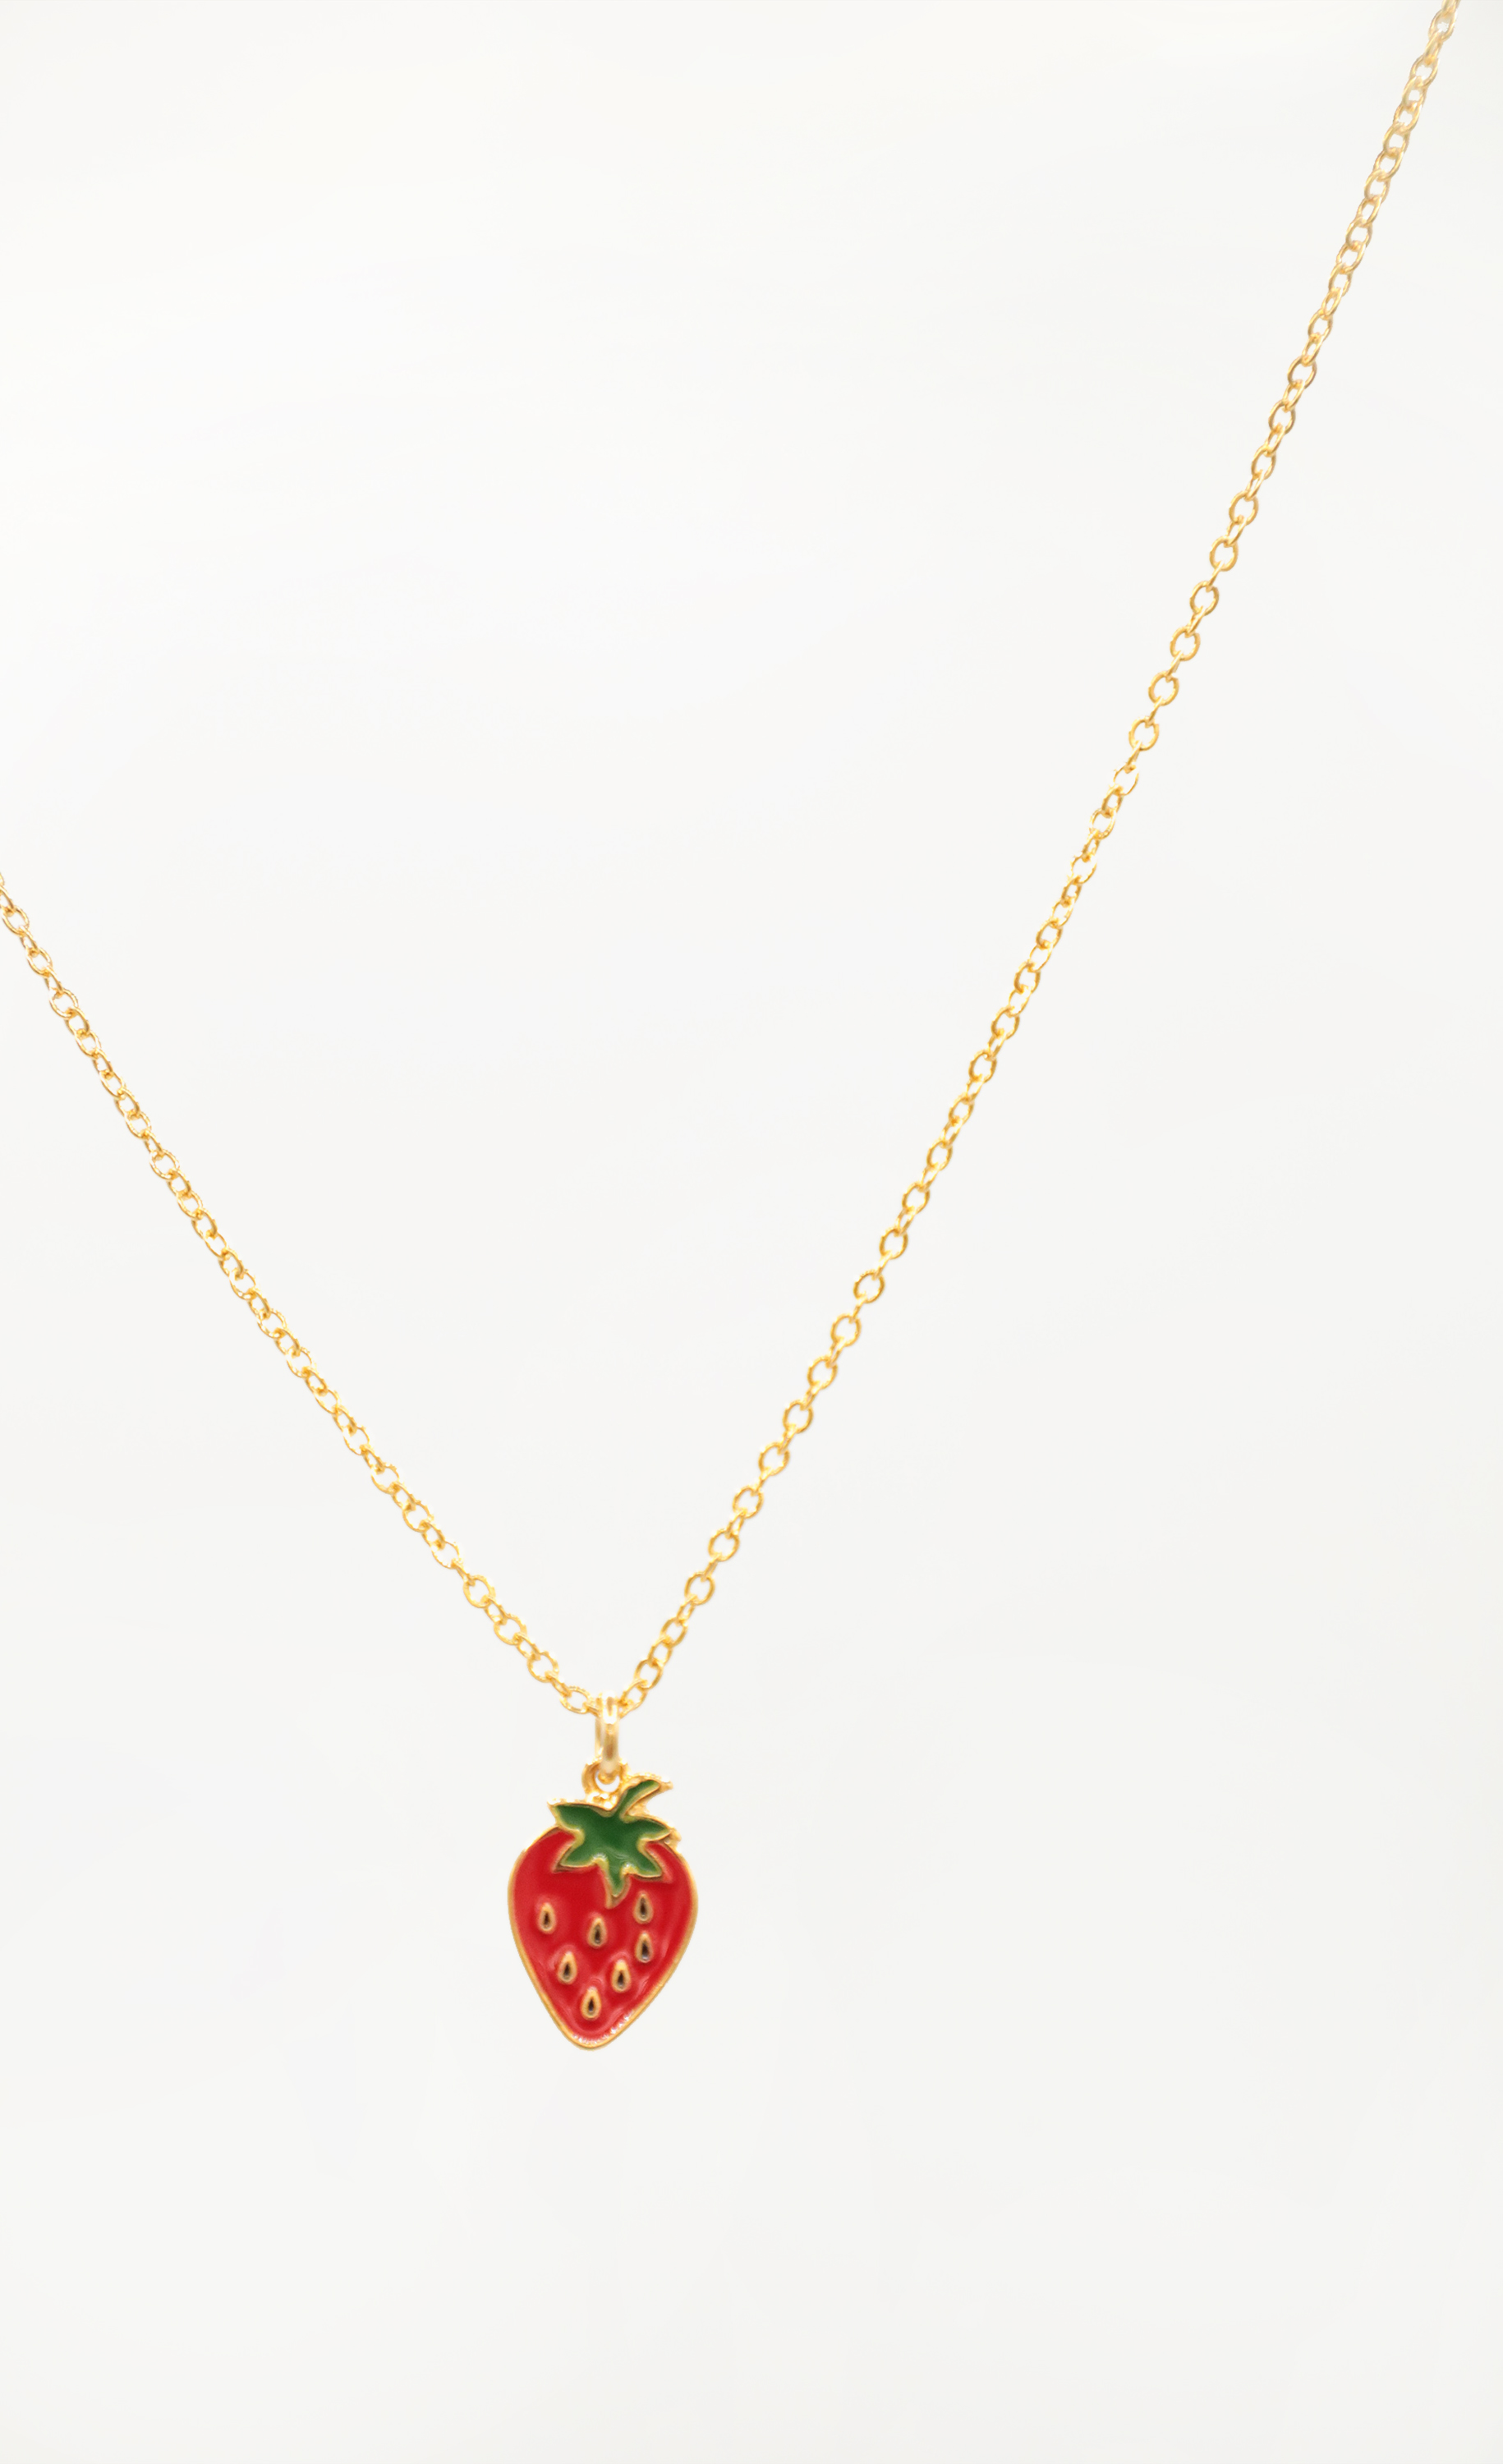 Fruit Of Love Necklace in Gold